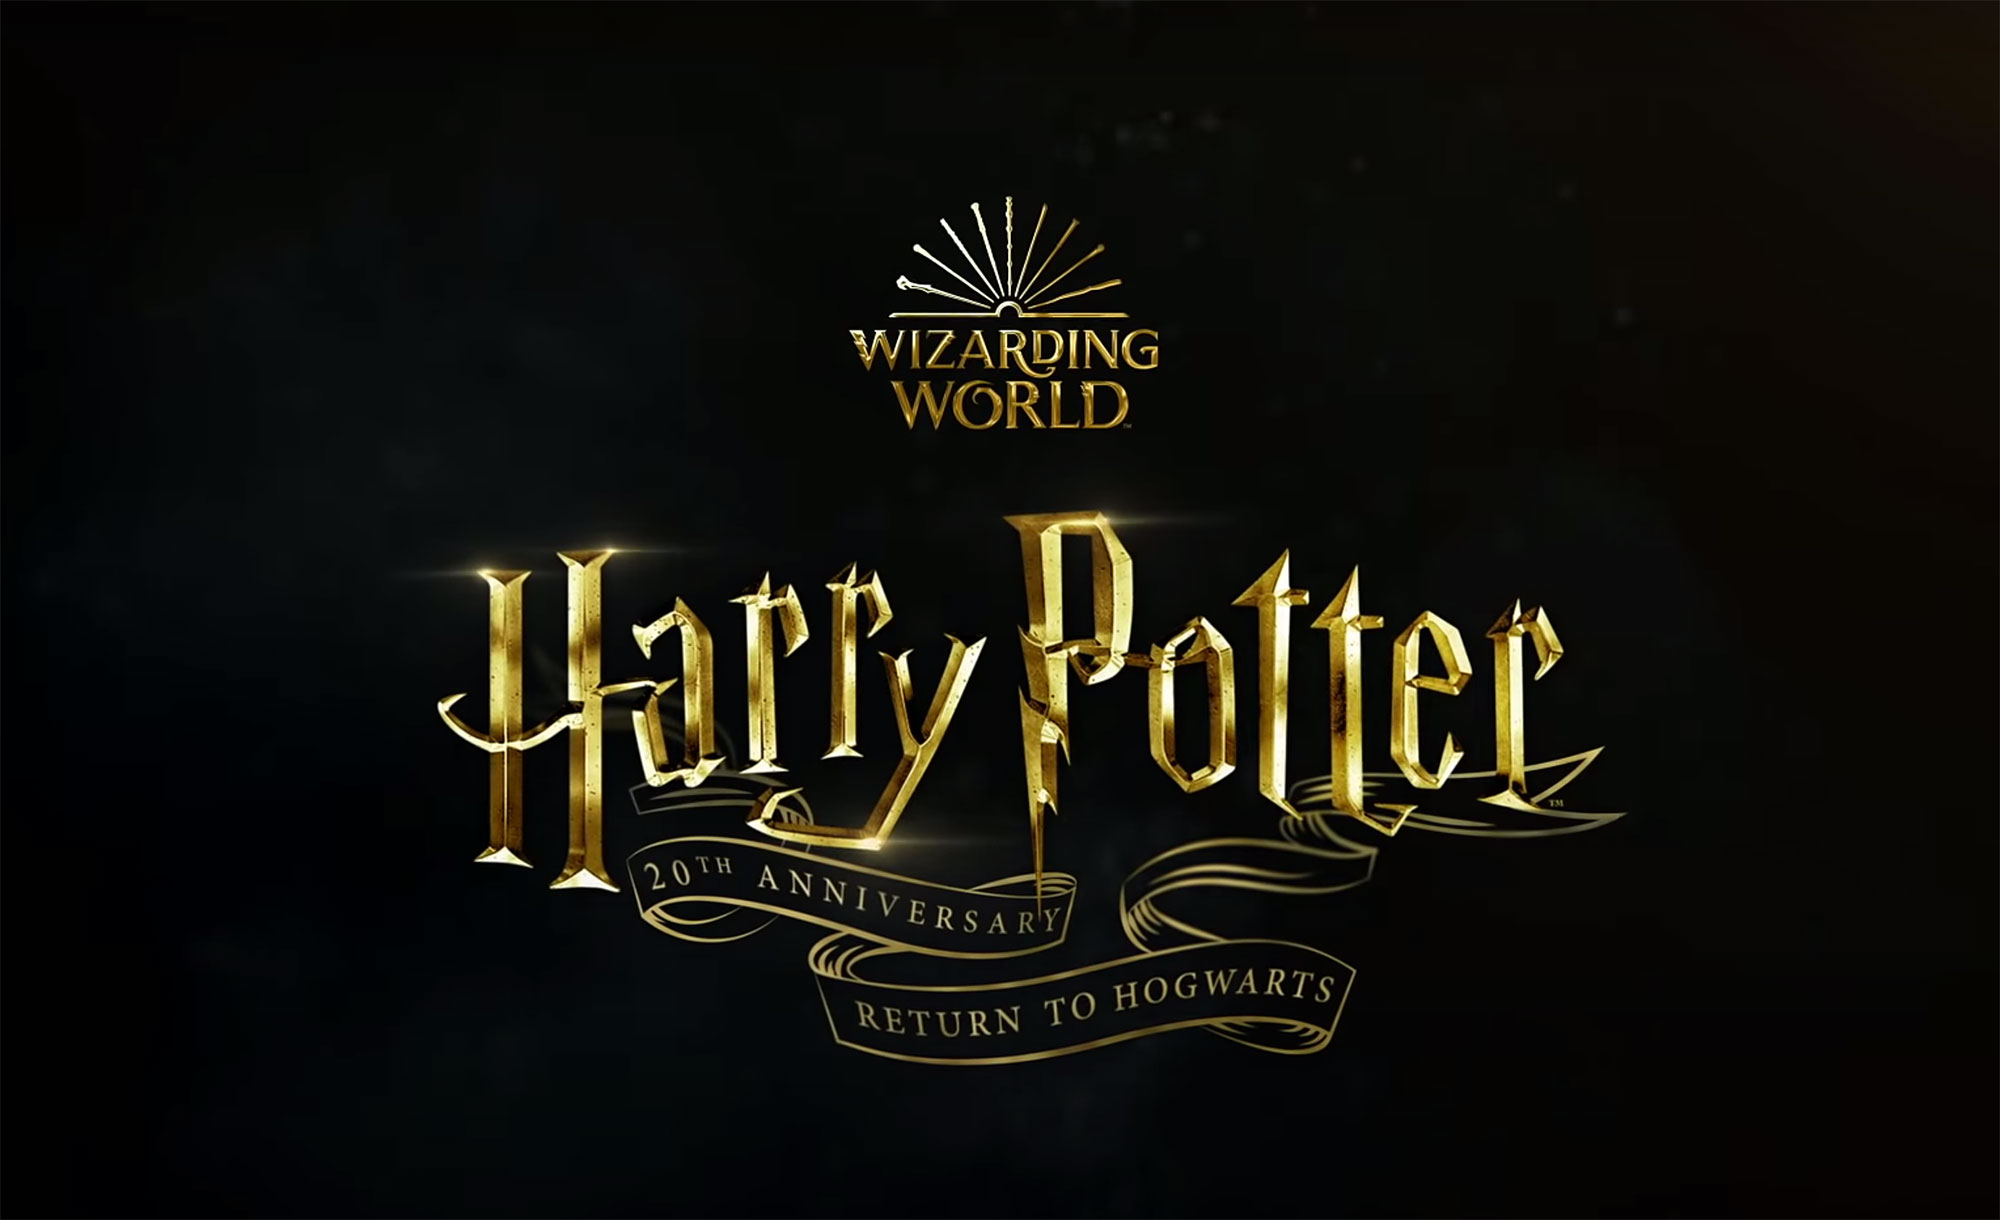 What to expect from the Wizarding World in 2022